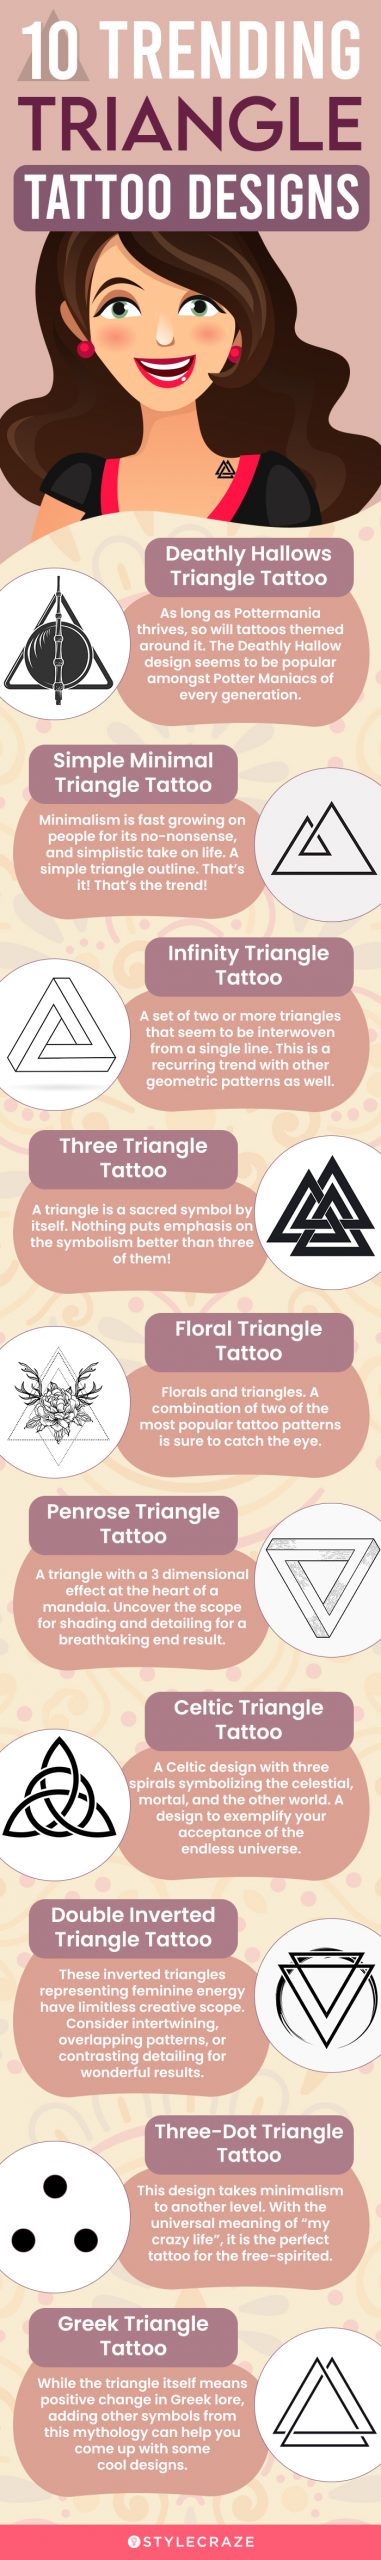 10 trending triangle tattoo designs (infographic)